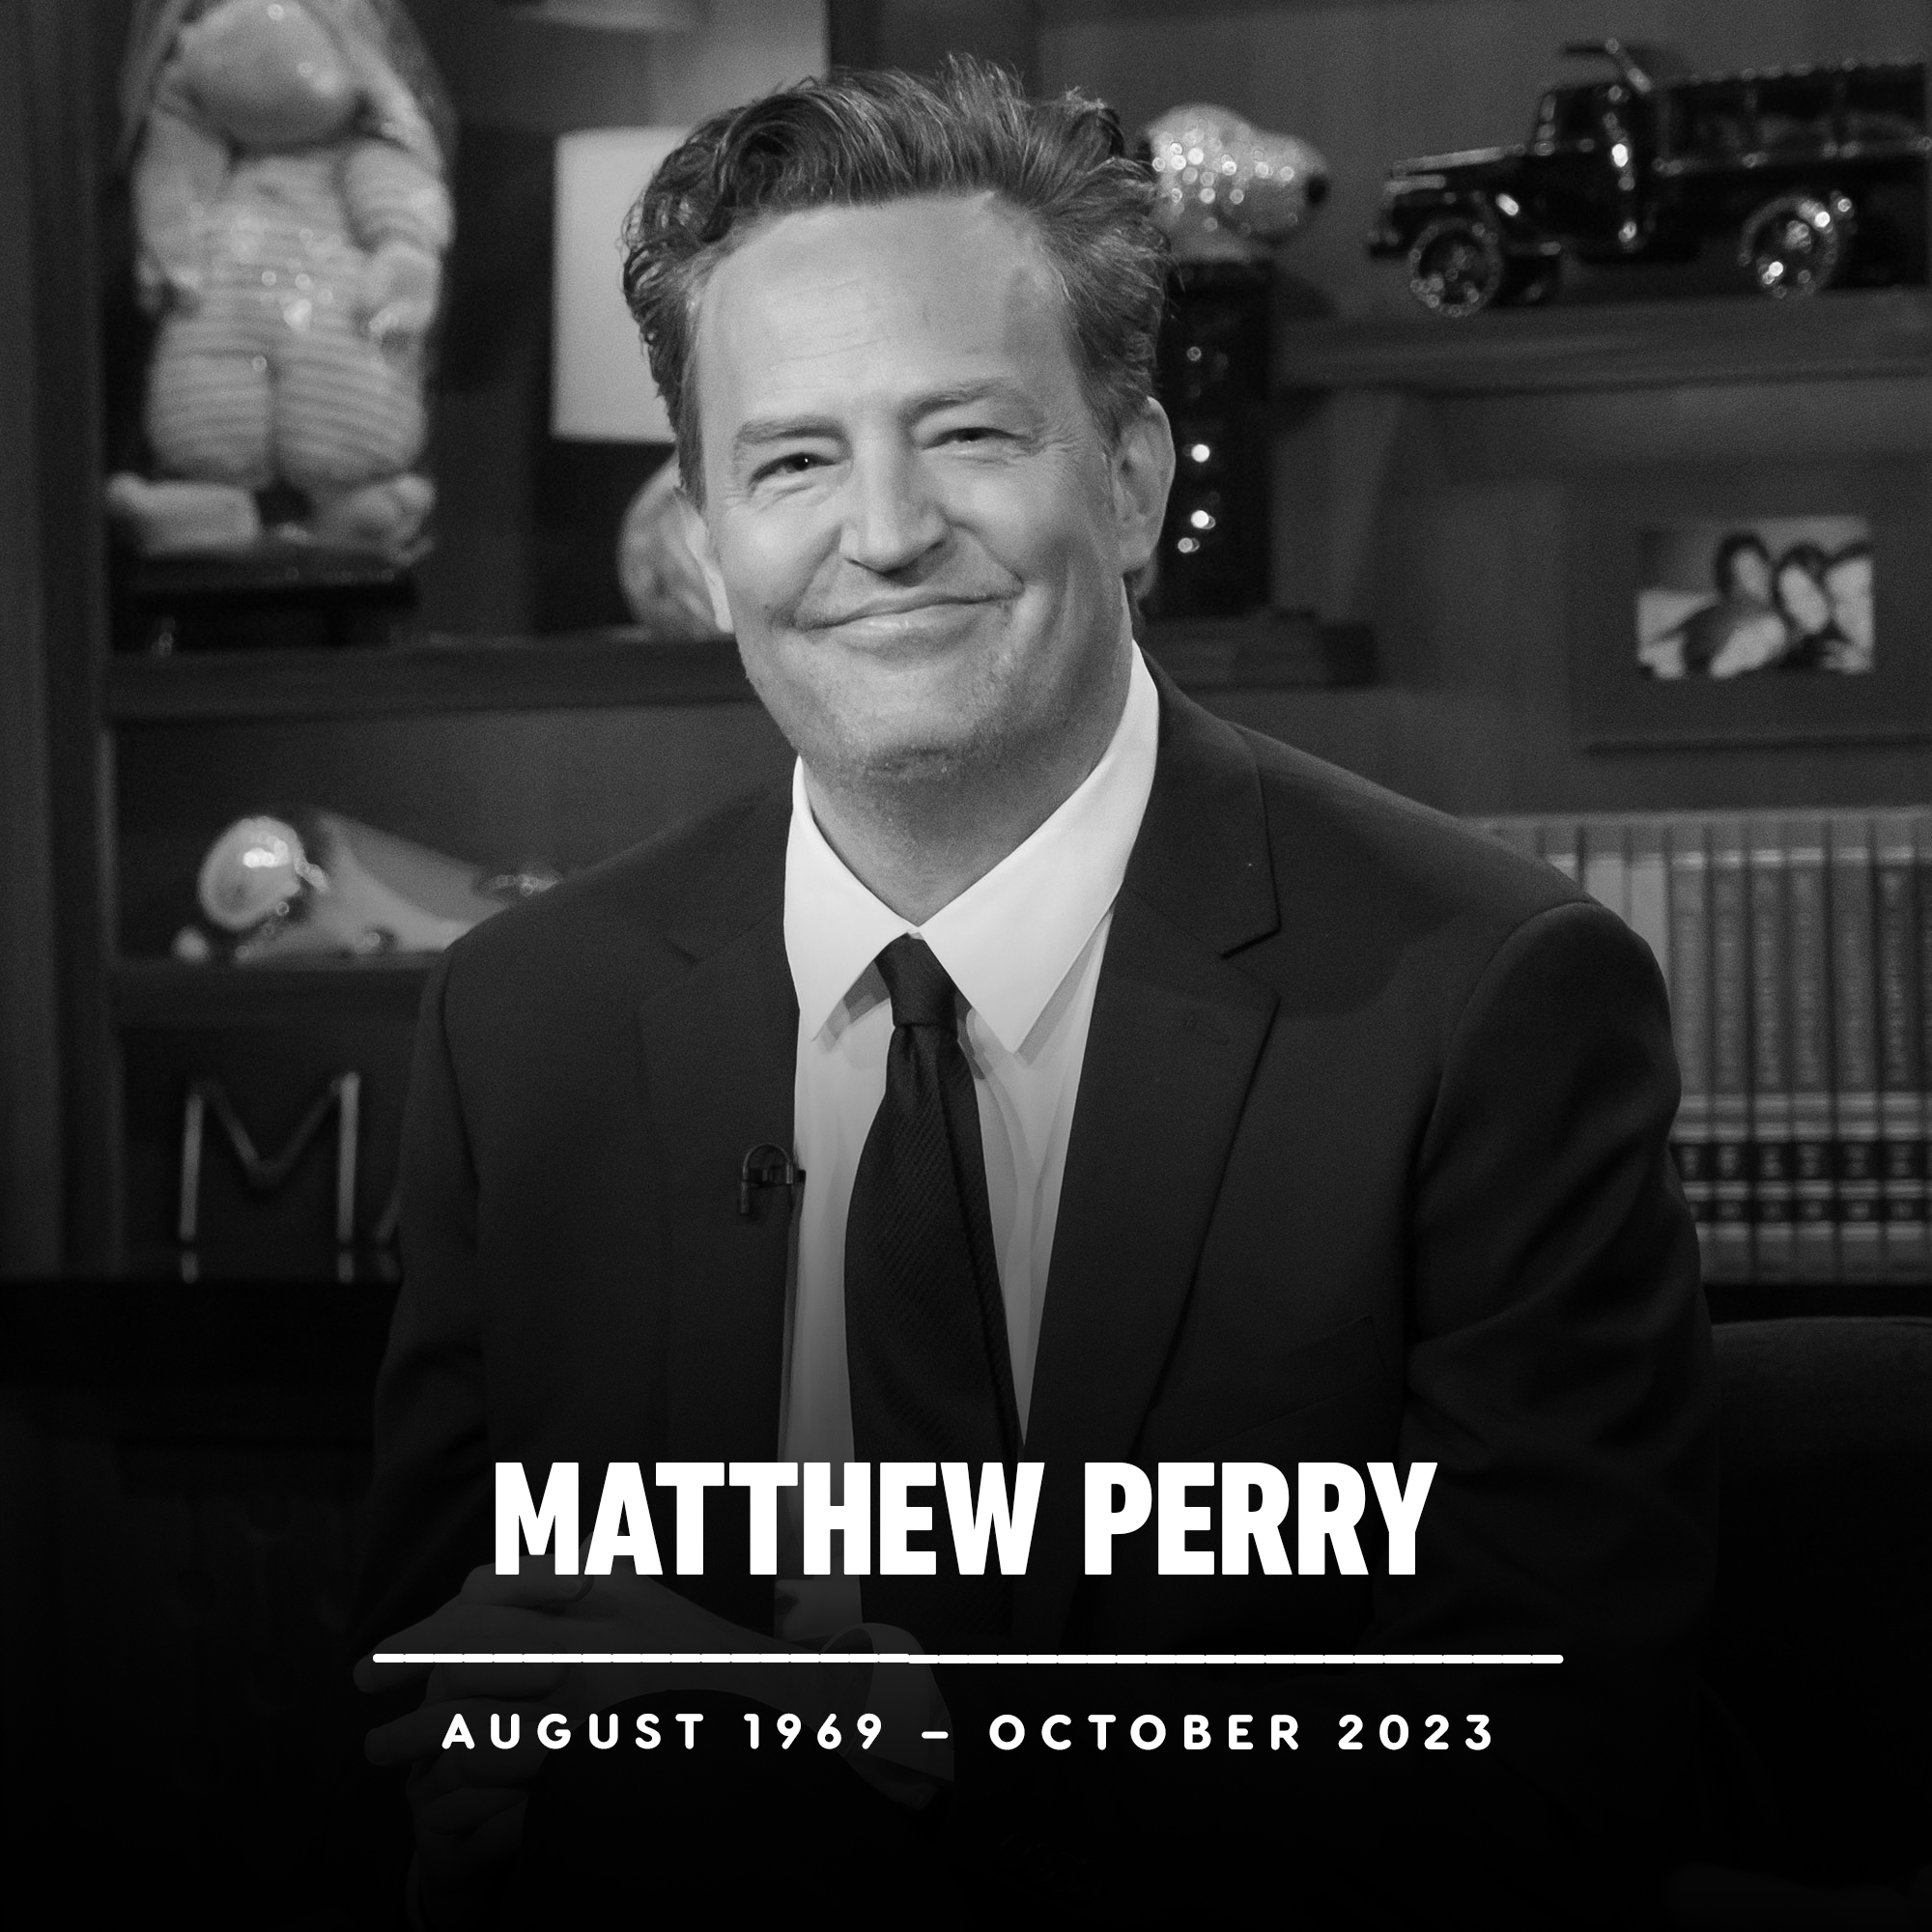 Matthew Perry, Emmynominated ‘Friends’ star, has died at 54, reports